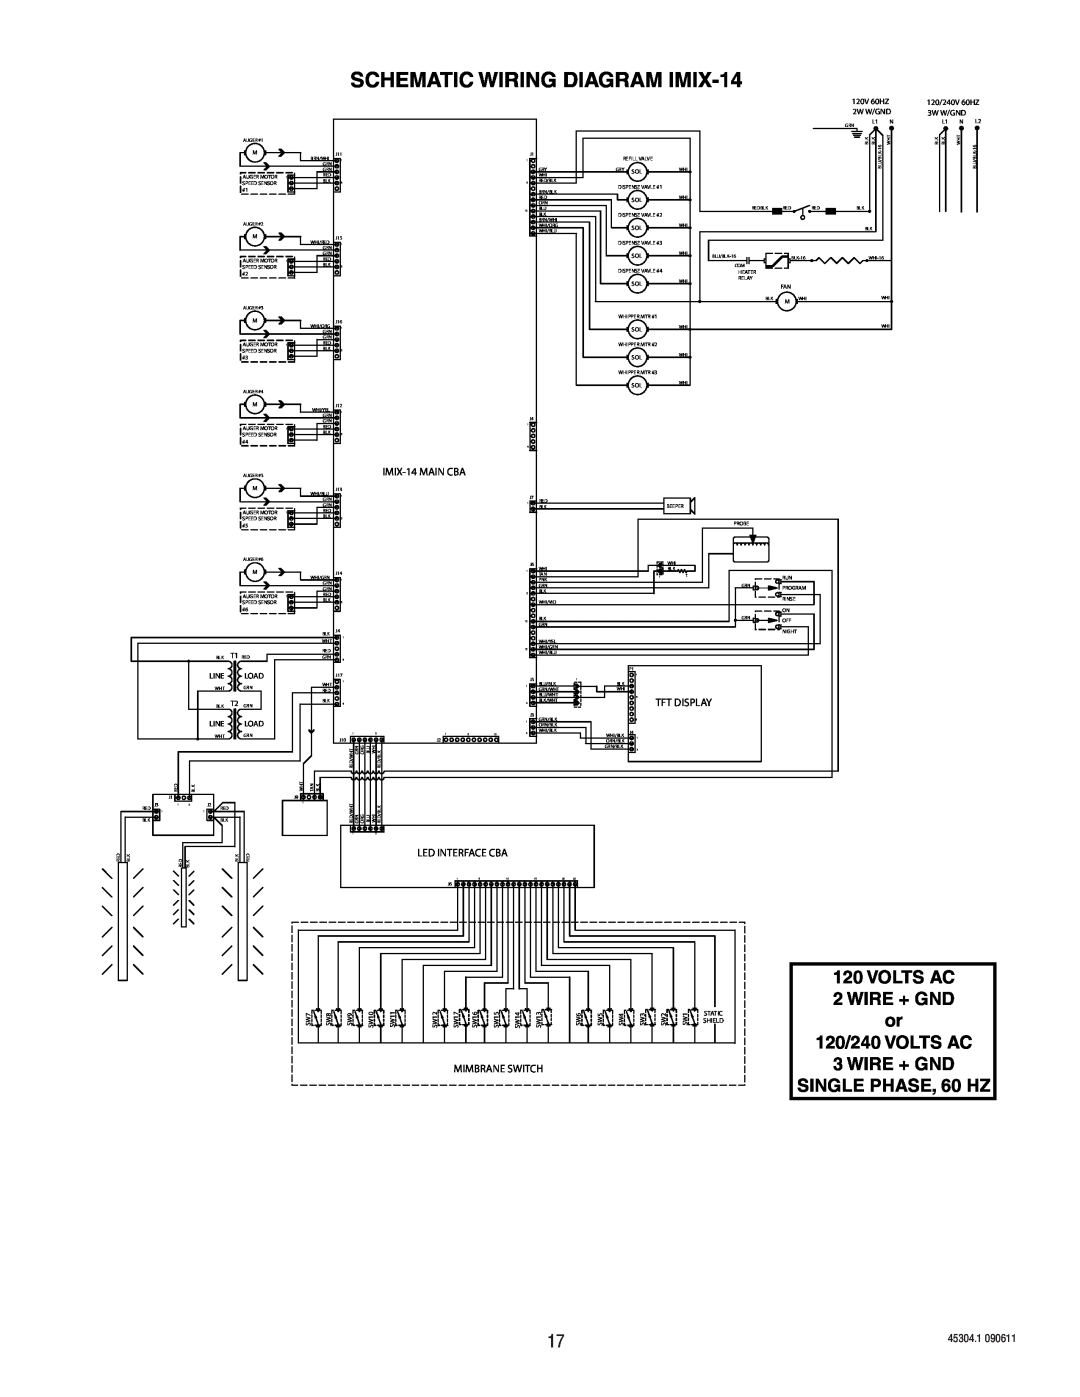 Bunn SCHEMATIC WIRING DIAGRAM IMIX-14, SINGLE PHASE, 60 HZ, Volts Ac, Wire + Gnd, 120/240 VOLTS AC, Led Interface Cba 